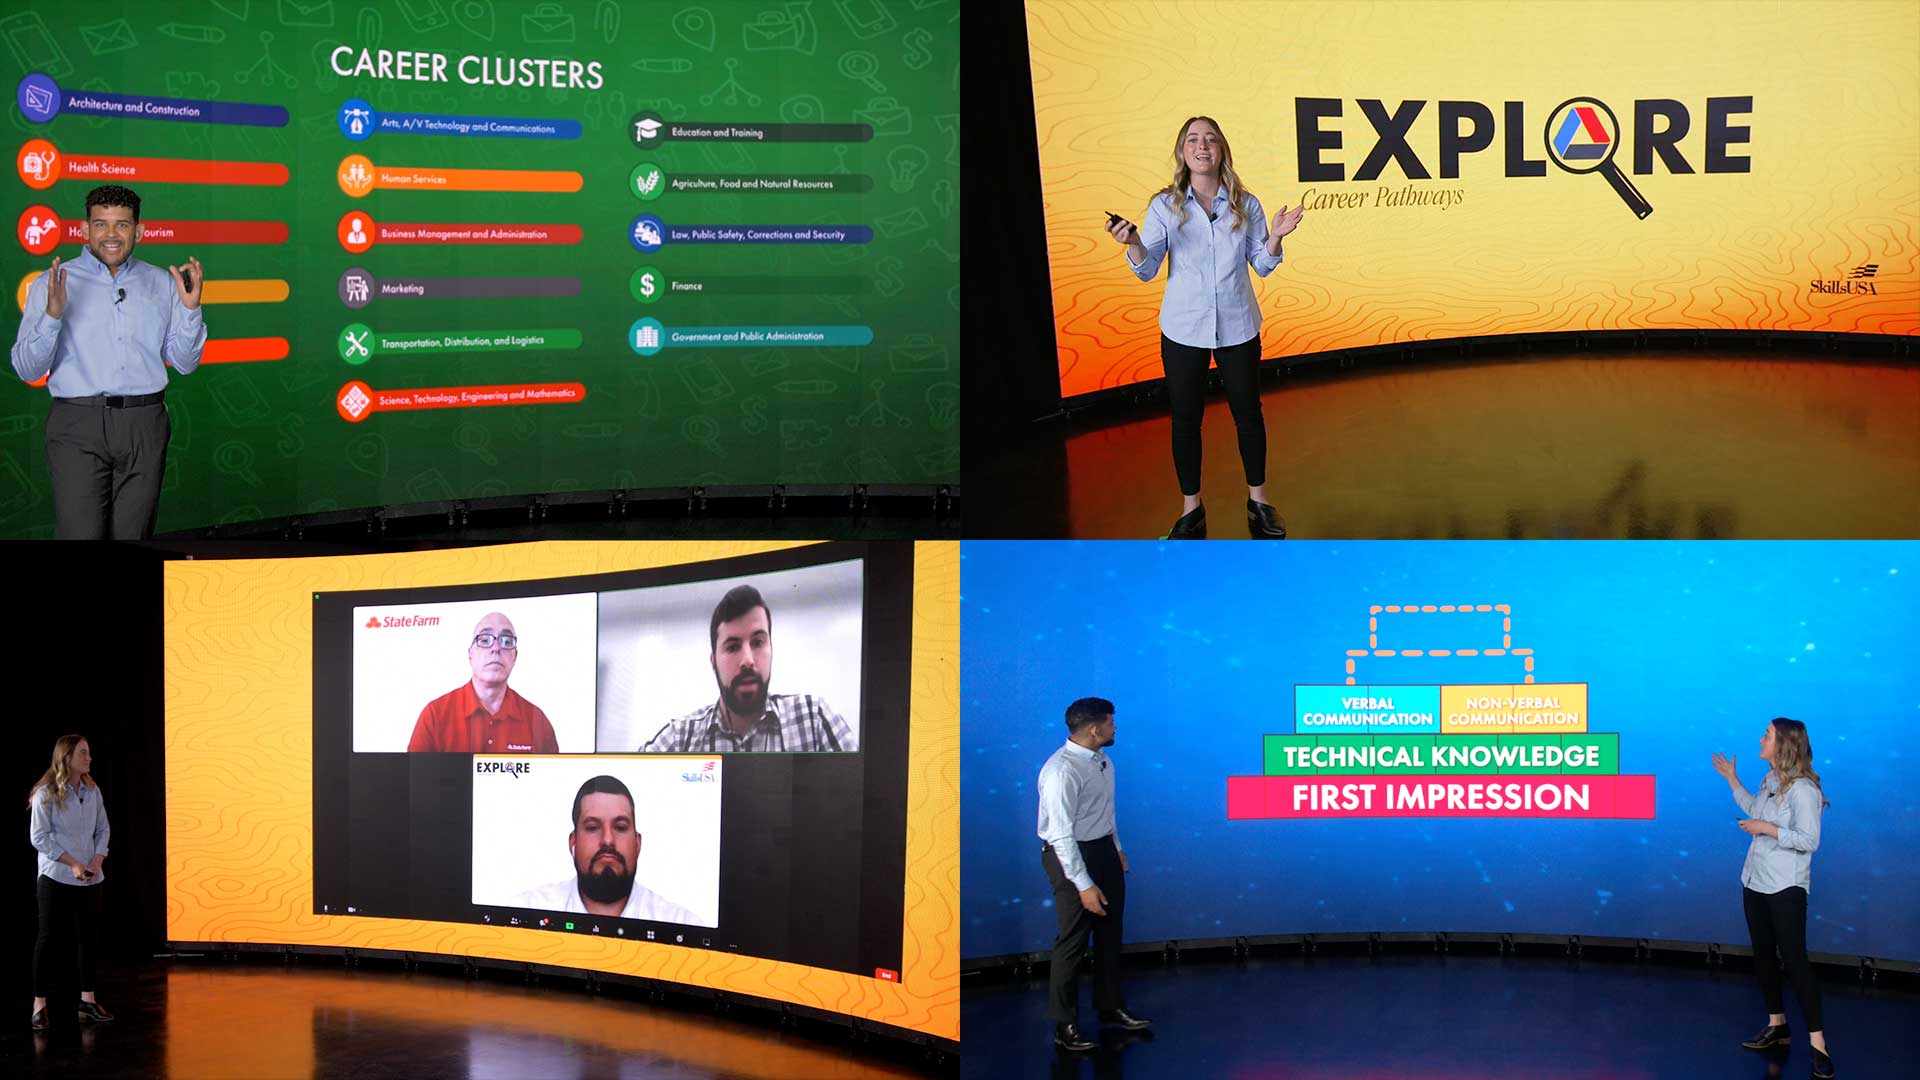 Four images show presenters standing in front of large screens with information on them